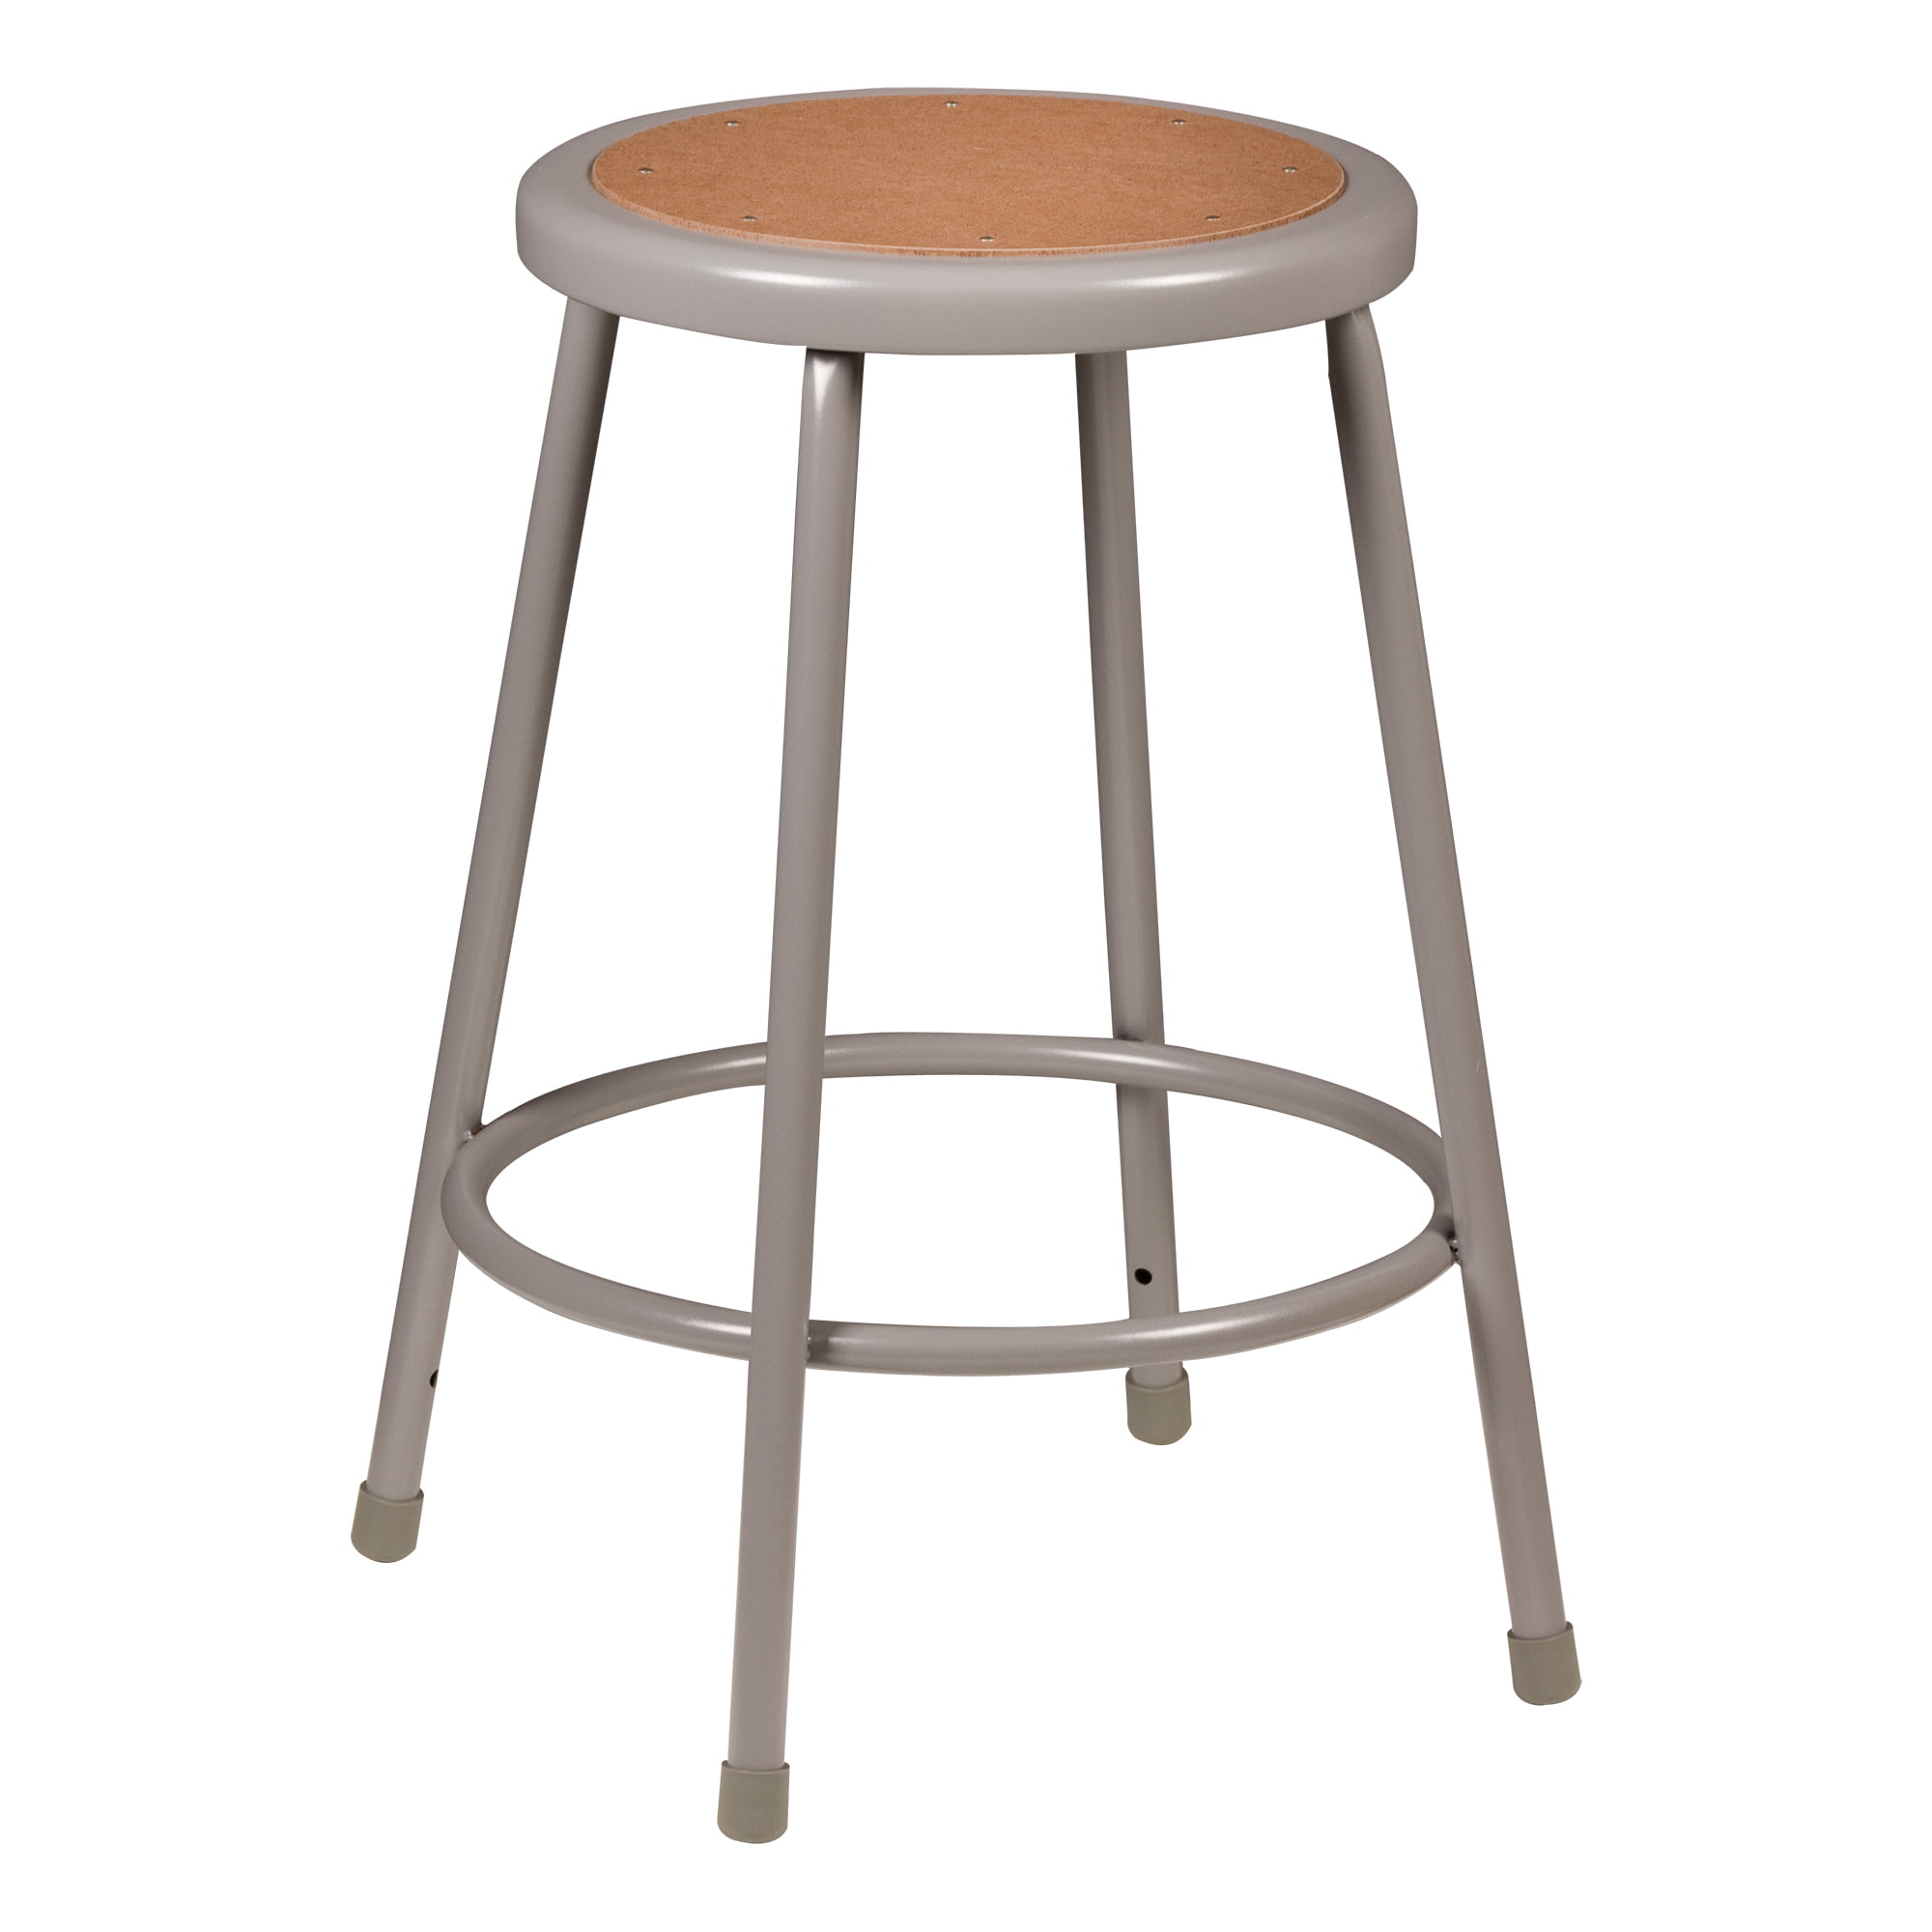 VINTAGE STACKING STOOLS LAB STOOLS WITH TIMBER SEAT